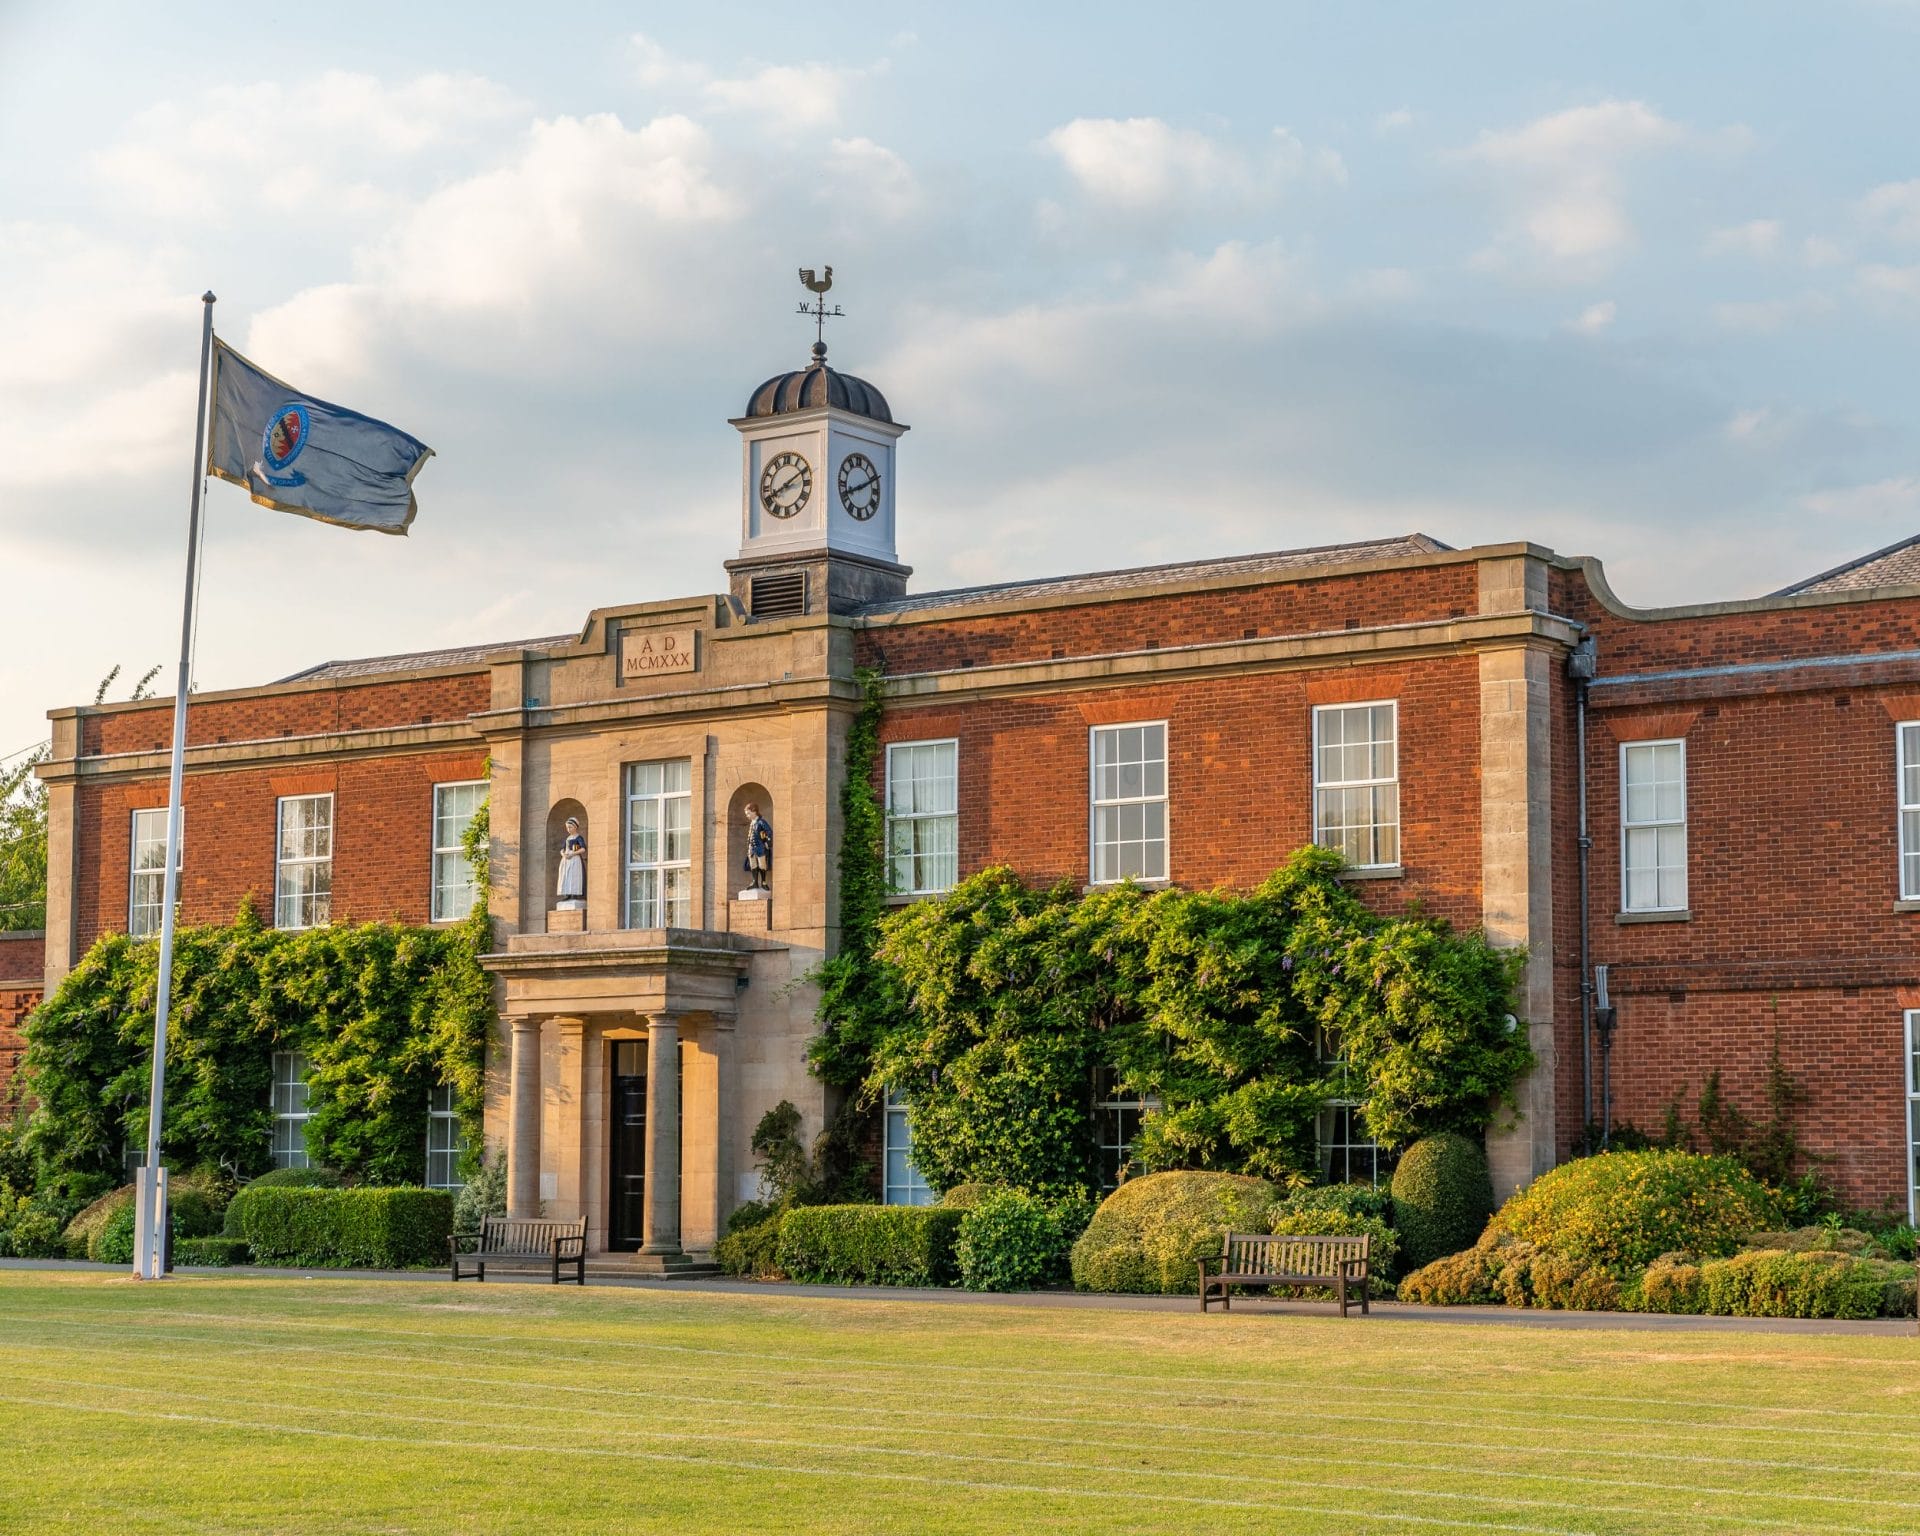 The entrance of the Blue Coat School with a flag waving in the wind in front